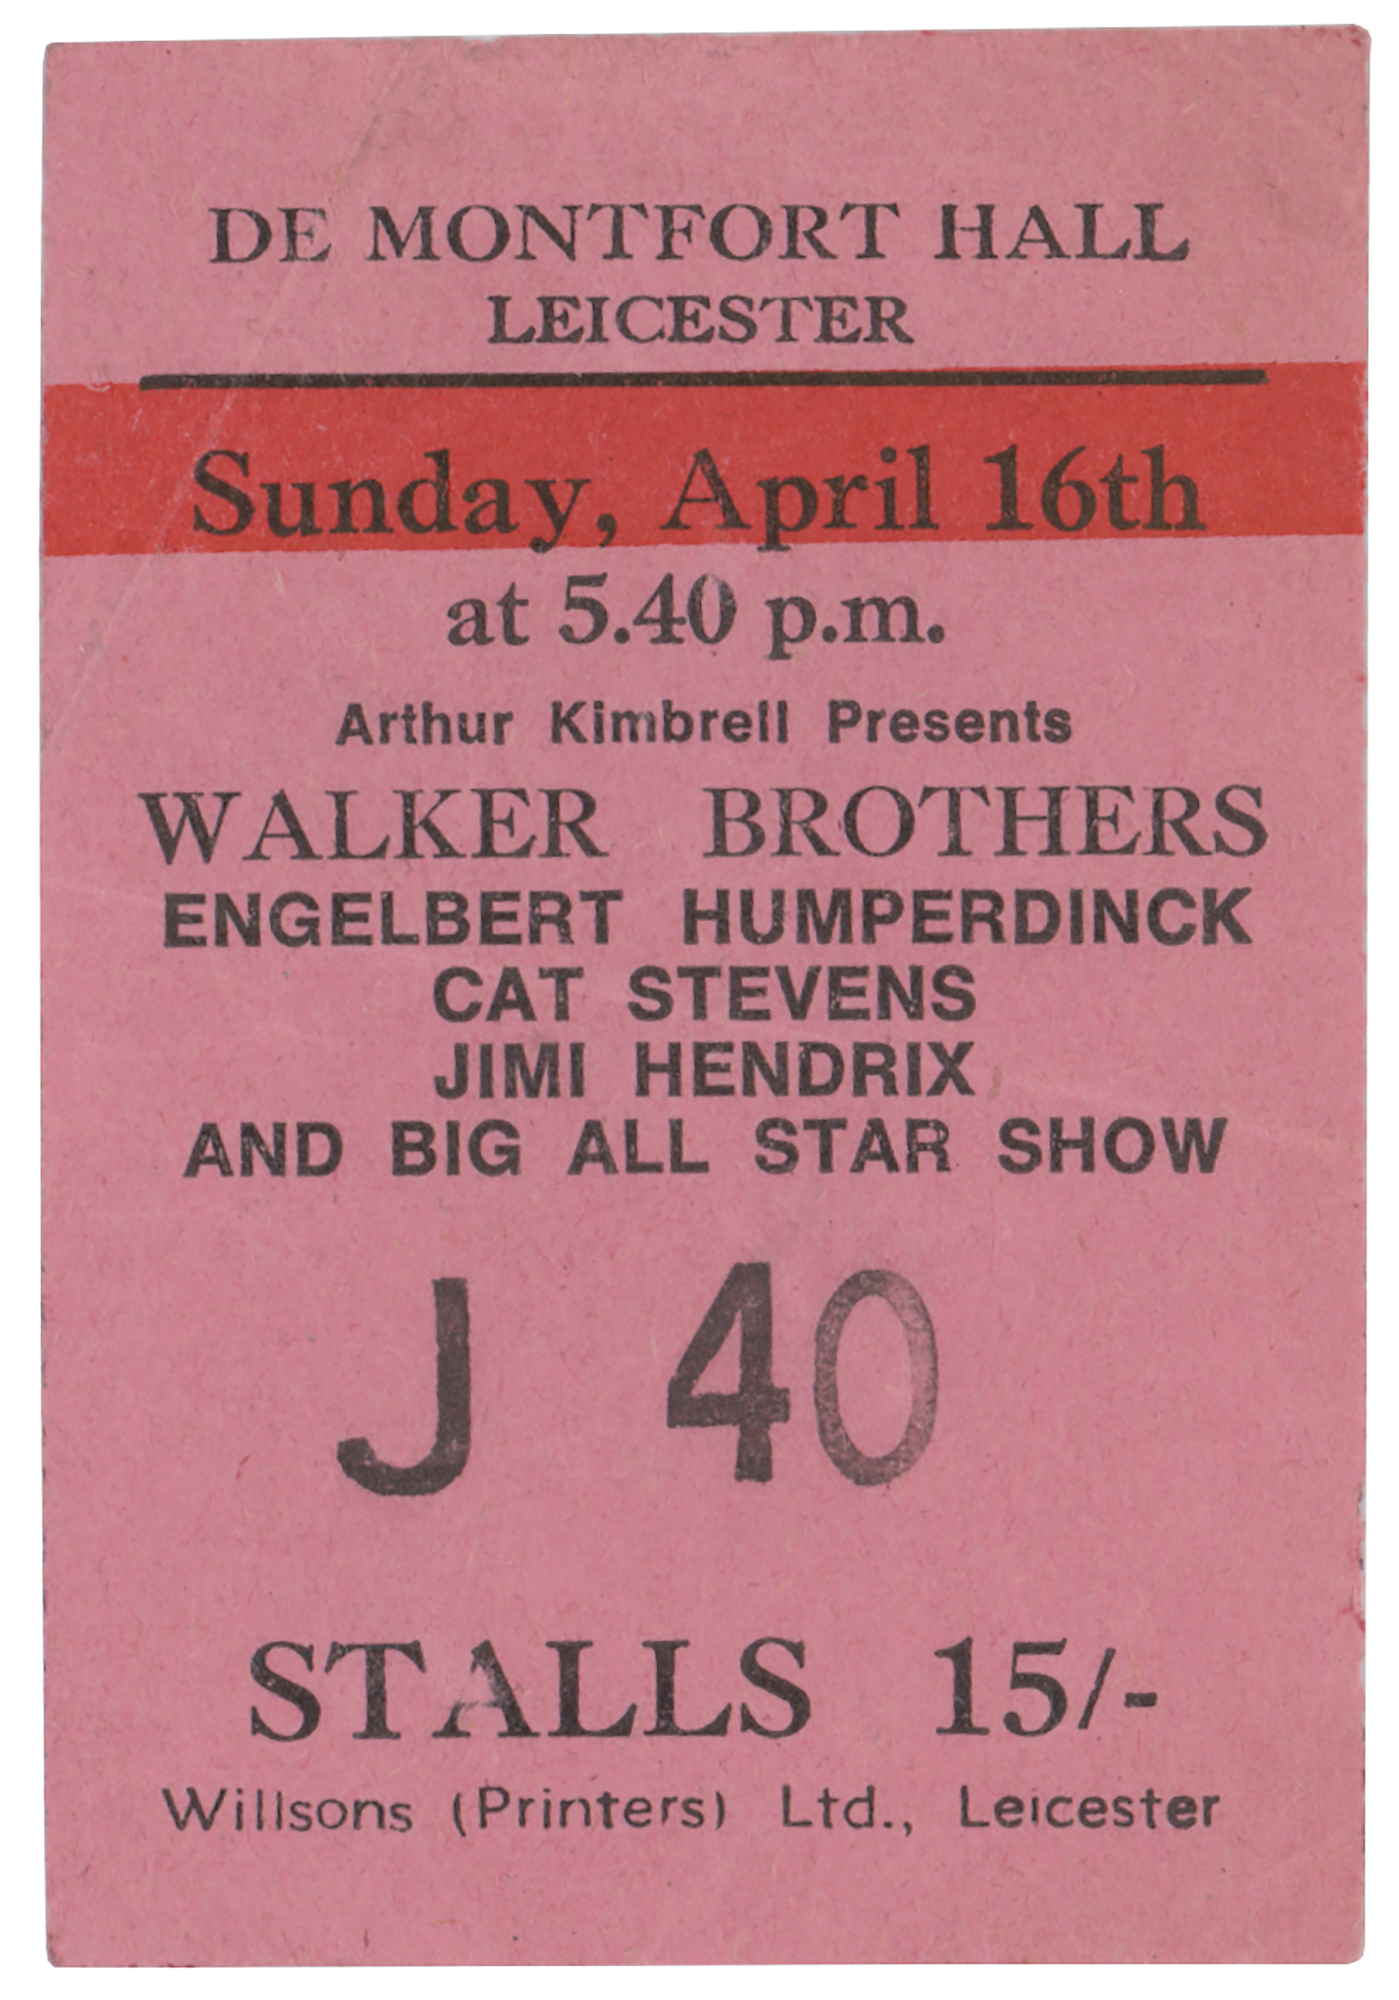 Lot #5086 Jimi Hendrix and the Walker Brothers 1967 Ticket Stub and Program